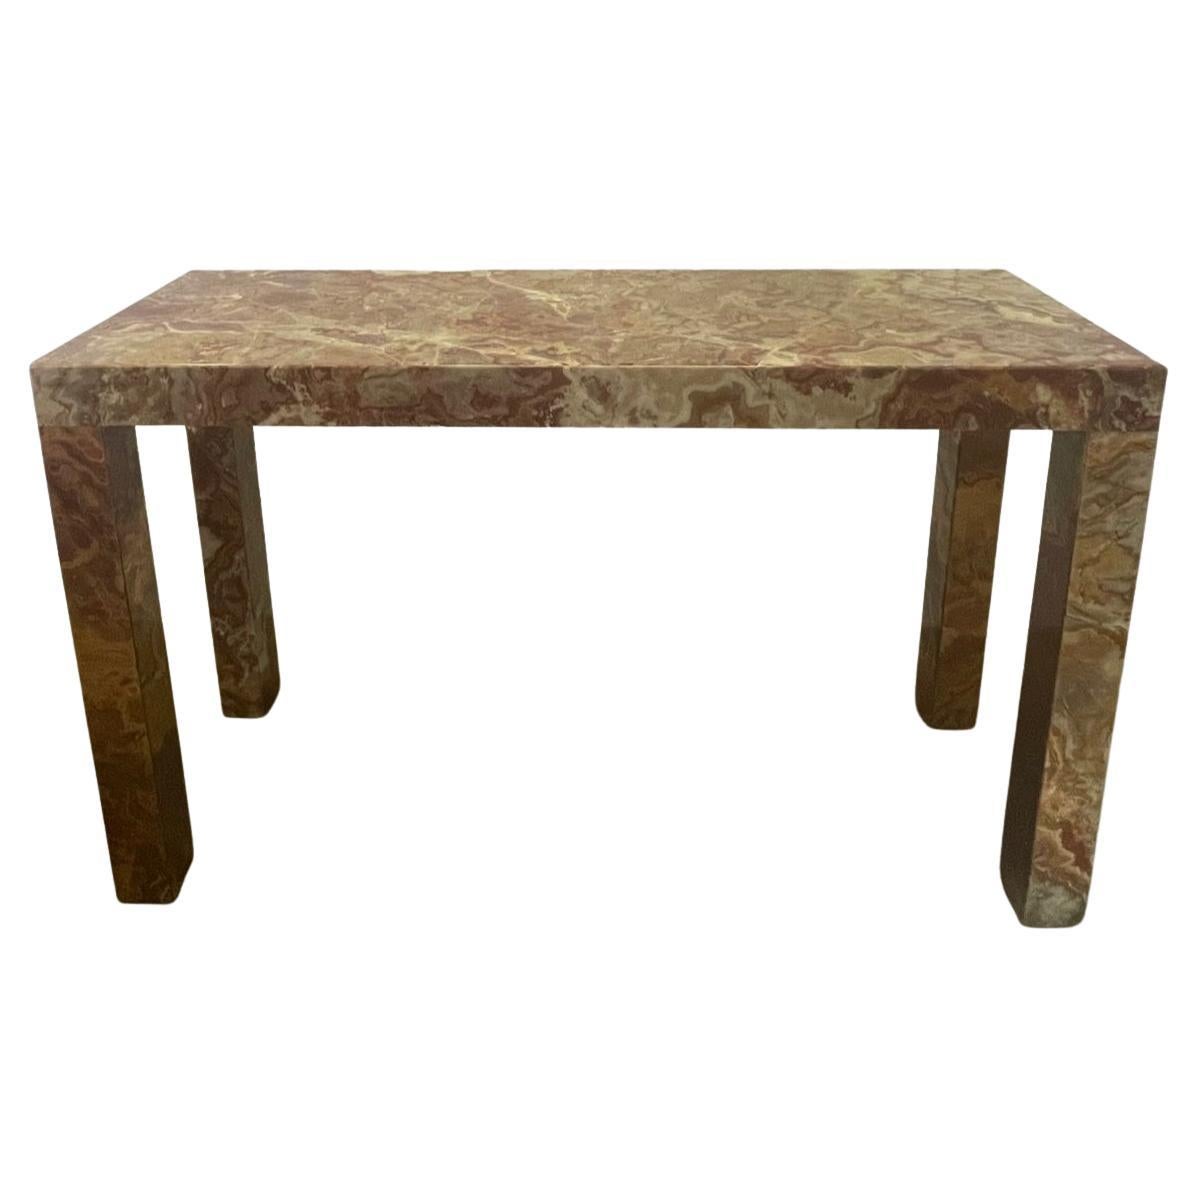 Superb Chic Italian Marble Parsons Style Mid-Century Modern Console Table